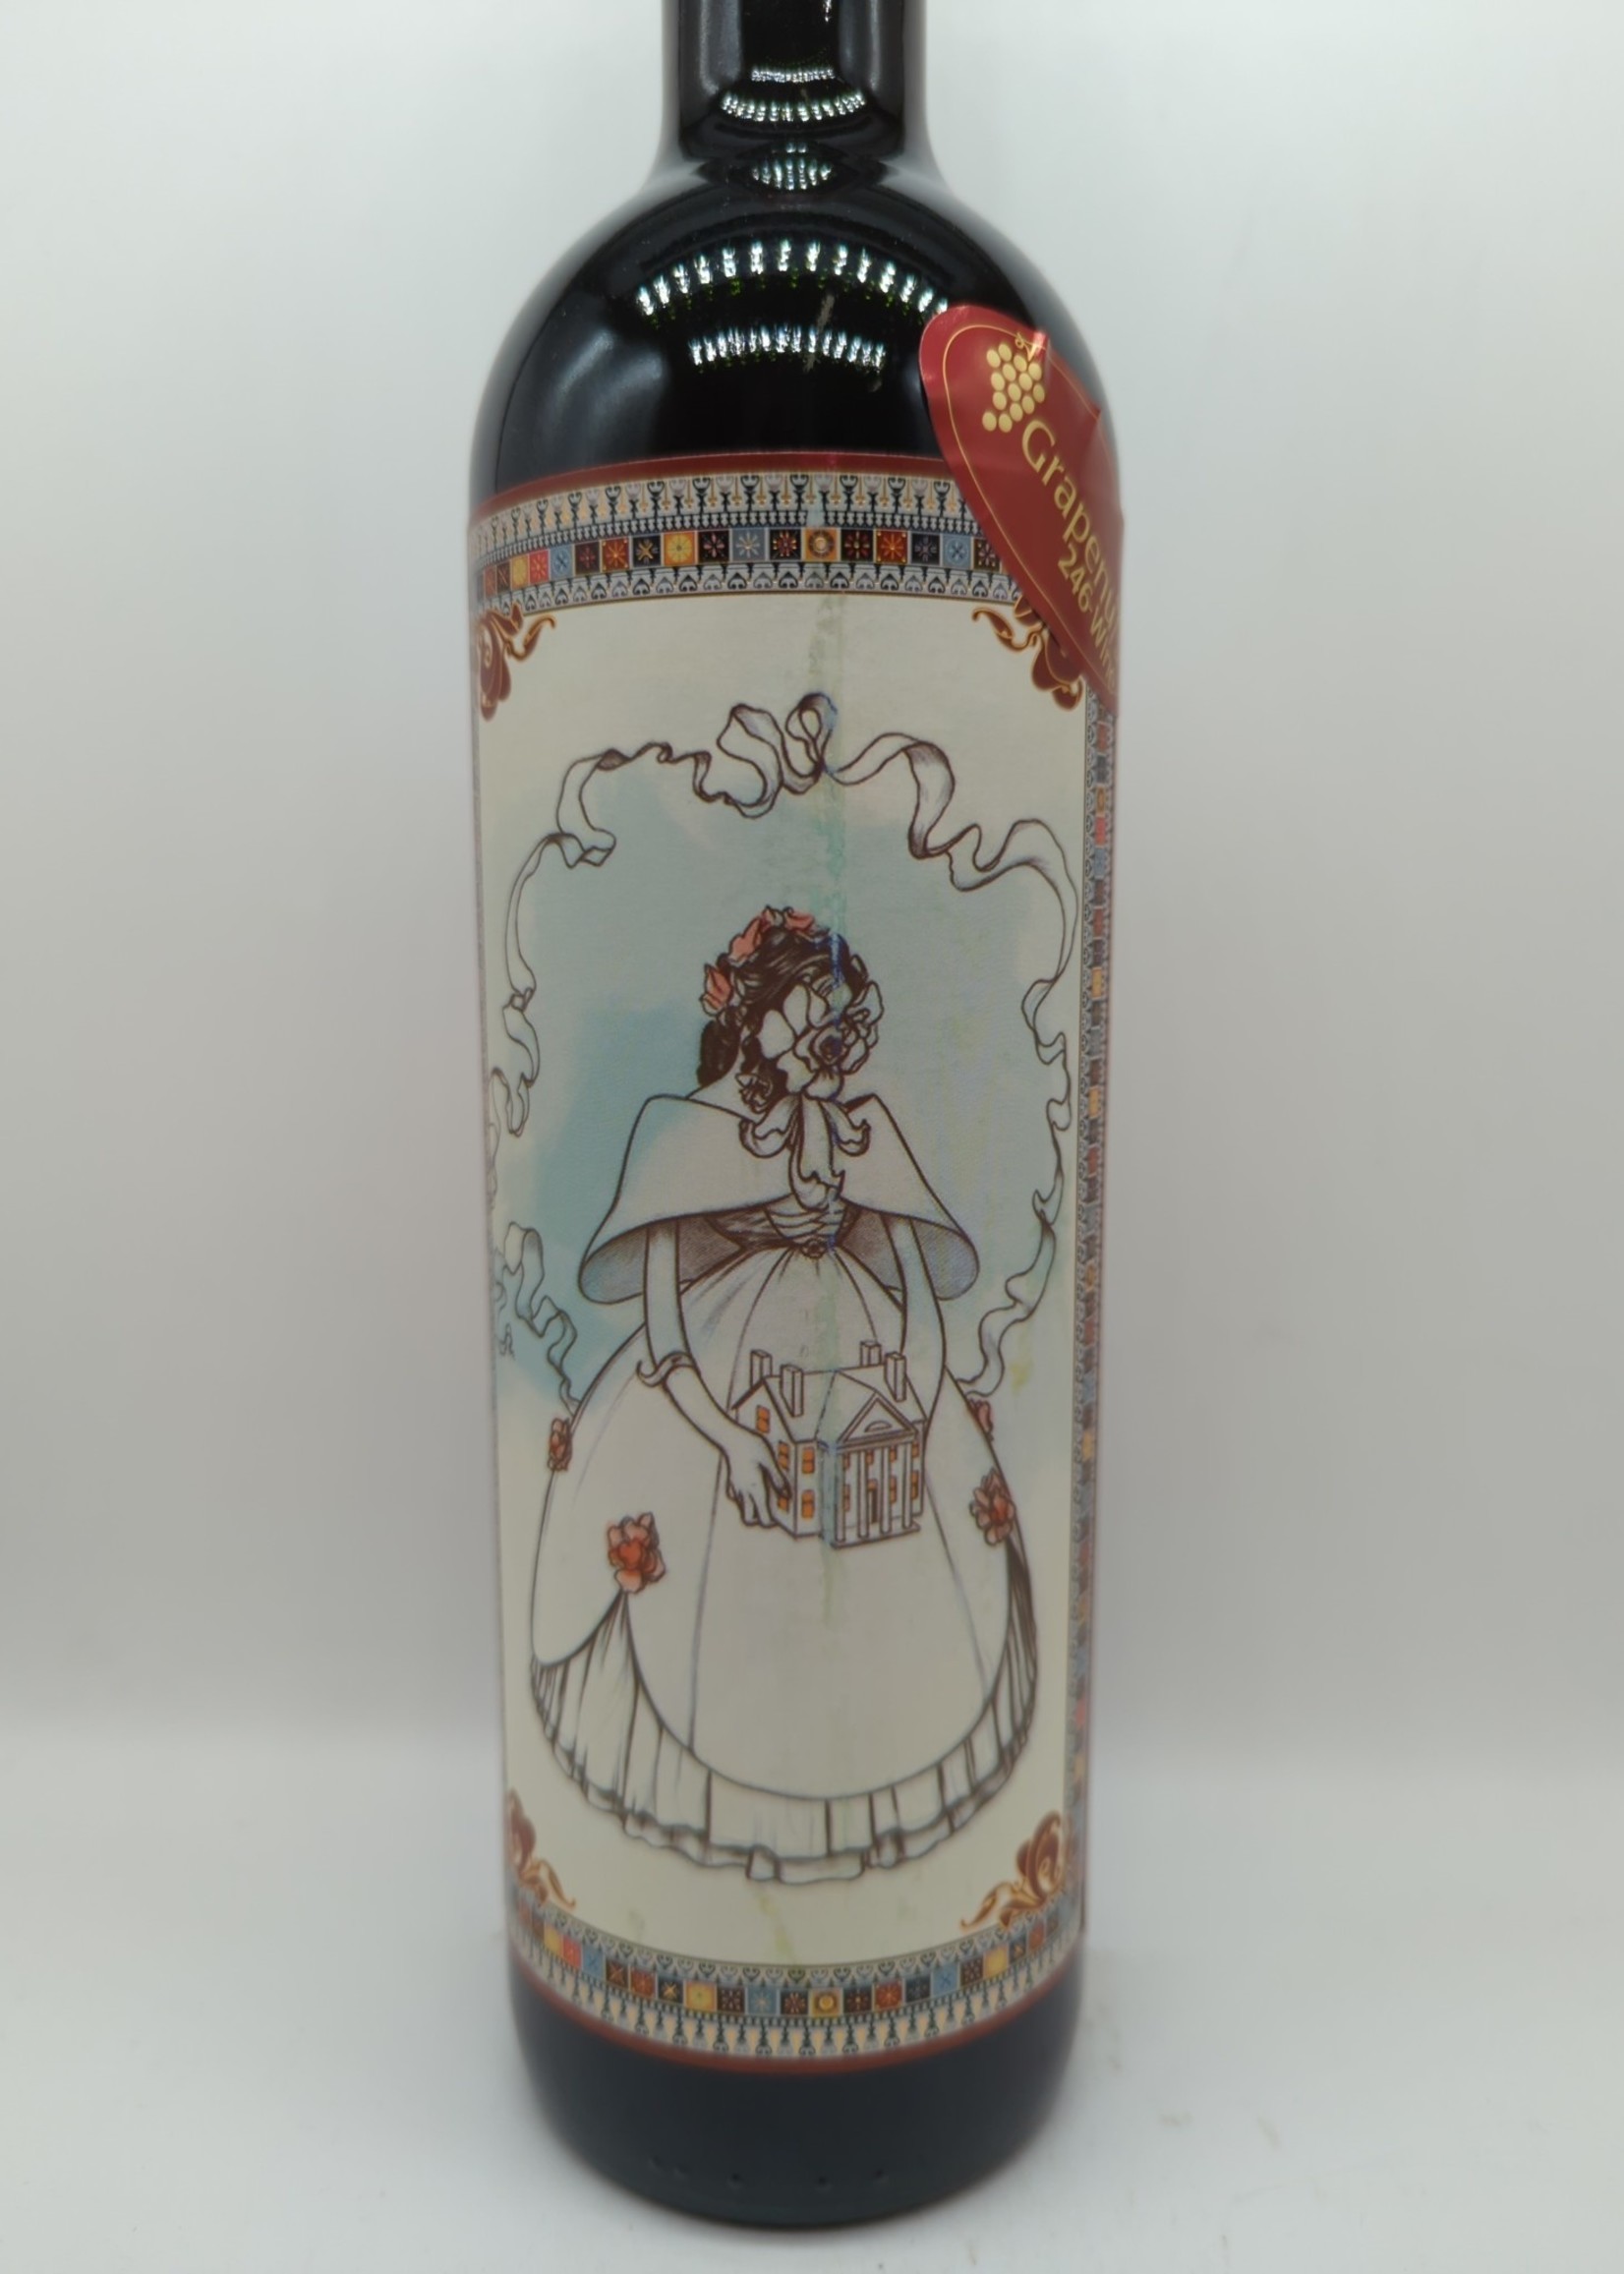 2019 FRENCH BELLE RED 750ml